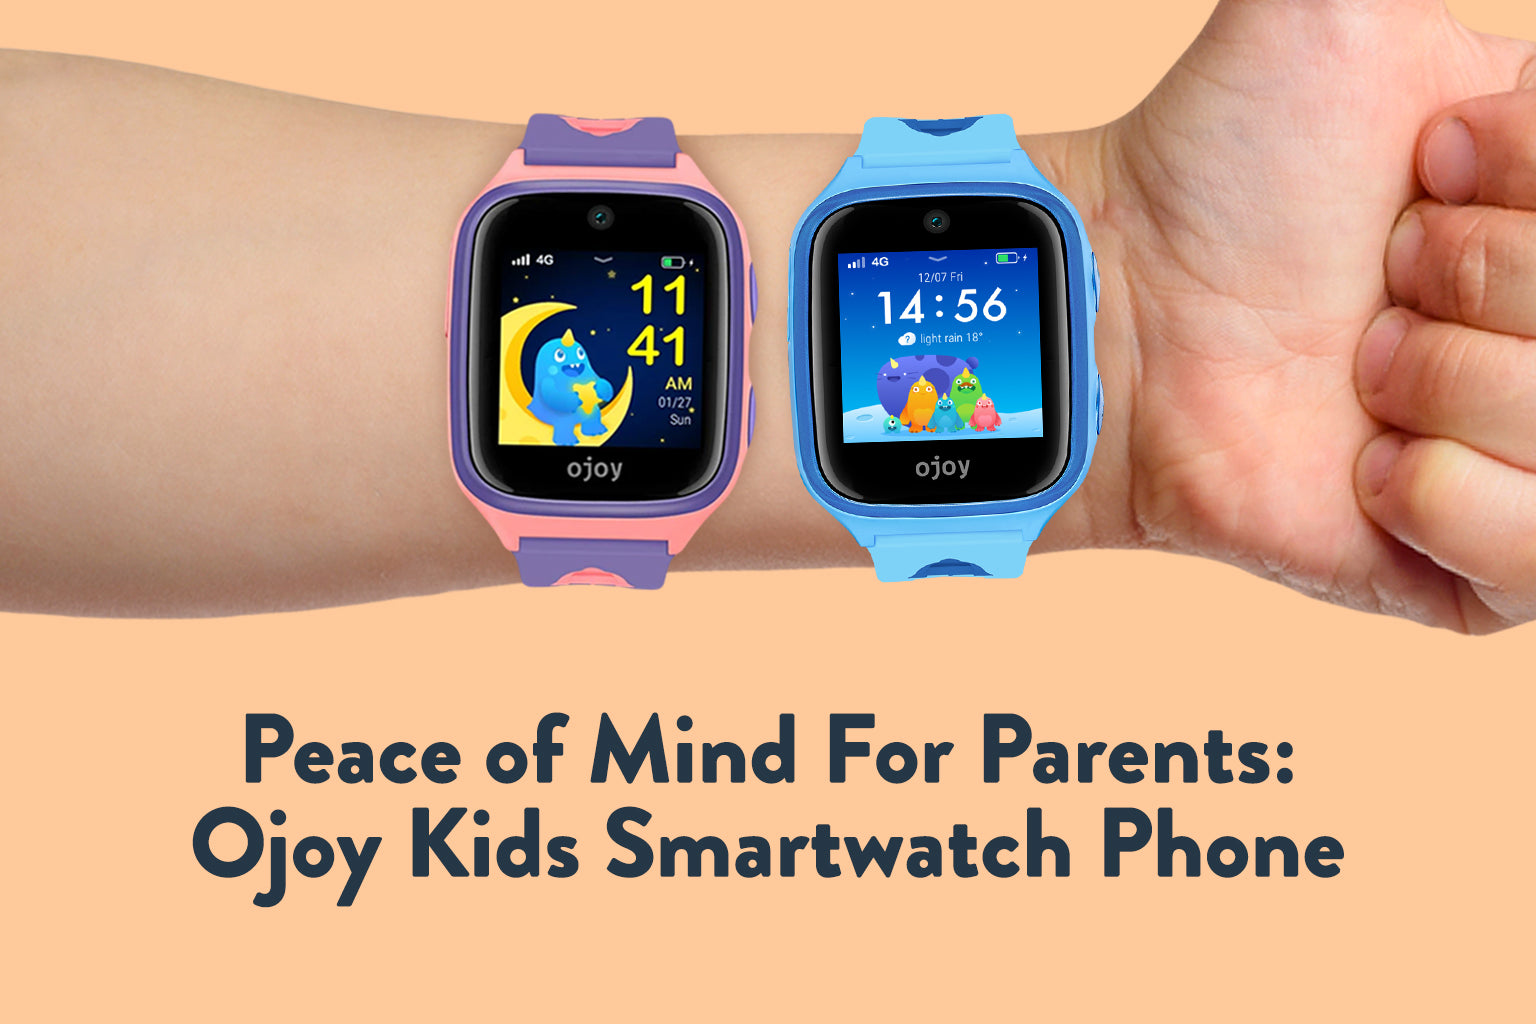 Peace of Mind For Parents: Ojoy Kids Smartwatch Phone